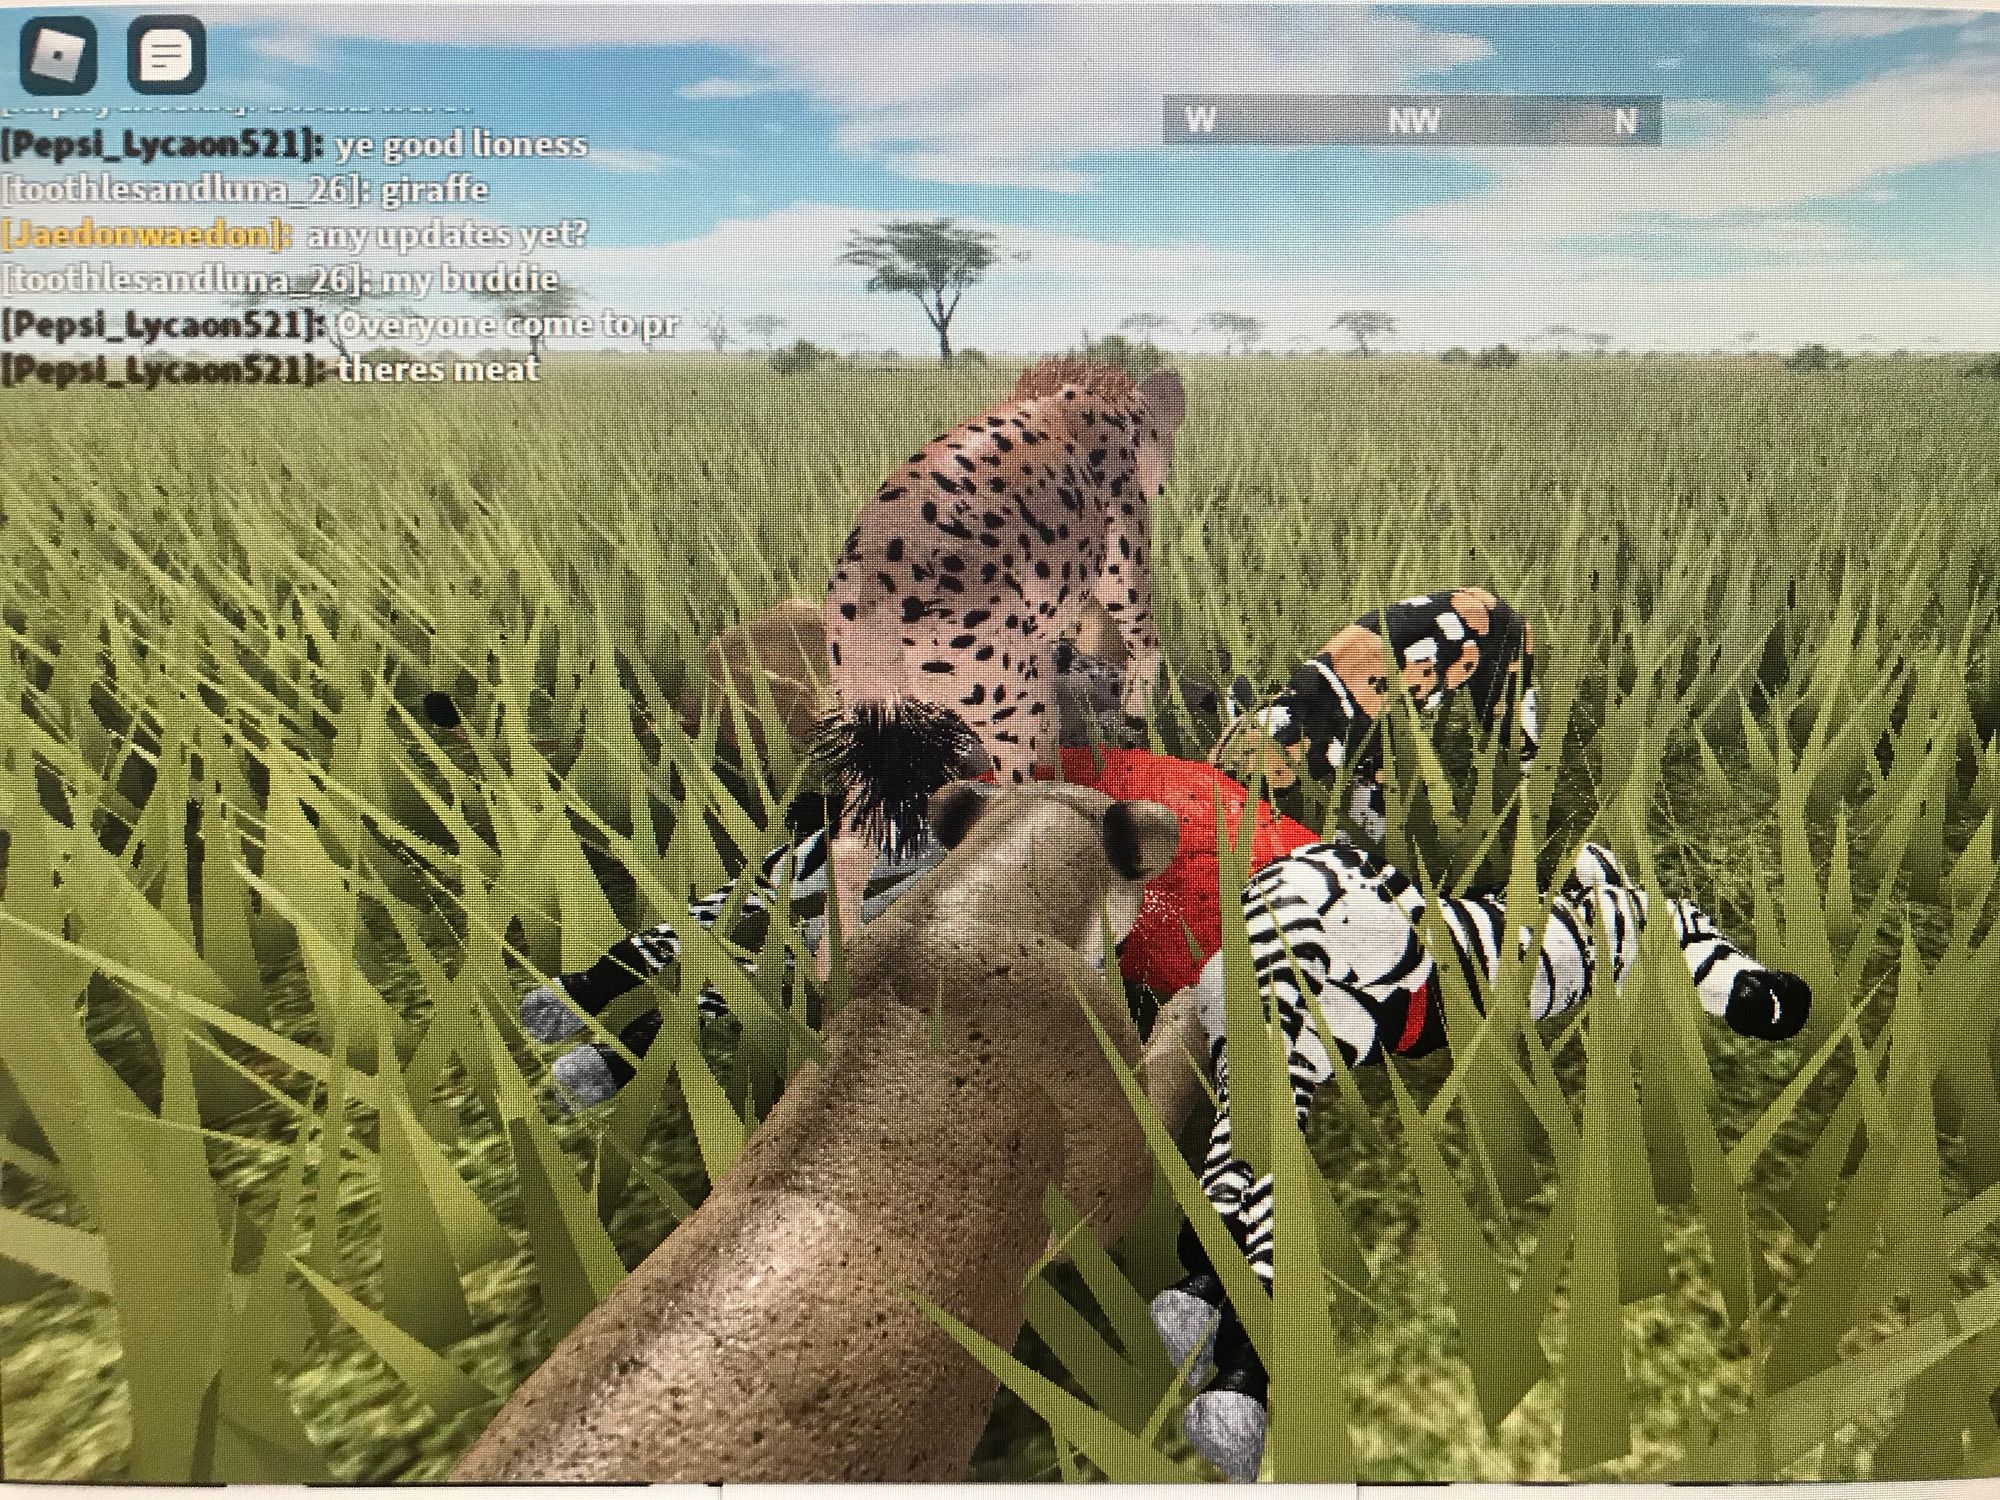 Screenshot of V being devoured by a lion, cheetah, and wild dog in a pixelated prairie with a hazy sky overhead.